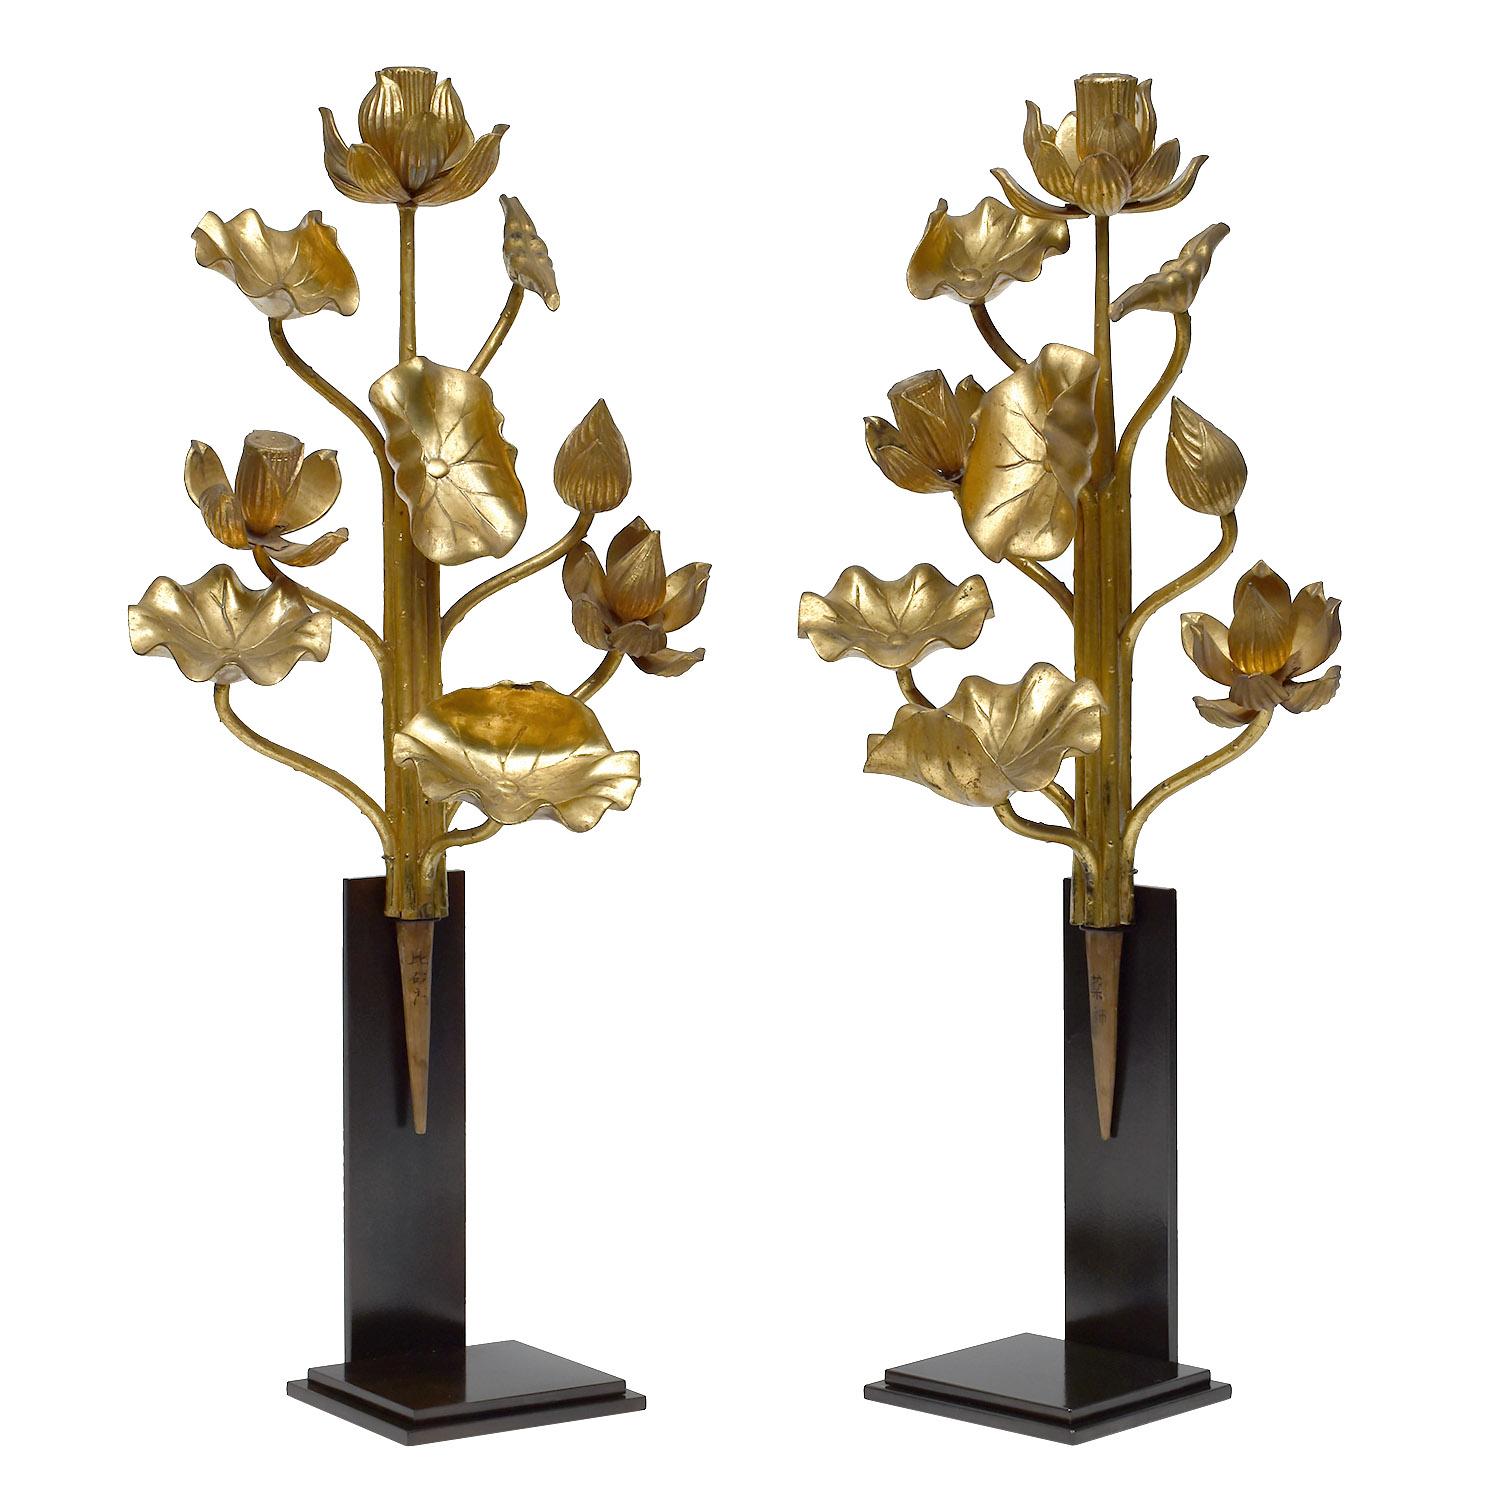 Gold lacquered wood.

17 x 10 in. / 43 x 25.5 cm

Height on custom display stand: 26.5 in / 67.25 cm

Meiji Period, 1868 – 1912

Custom Mounted on Bases with a Vertical Backdrop and Antique Bronzed Patinated Steel

These two wall sconces